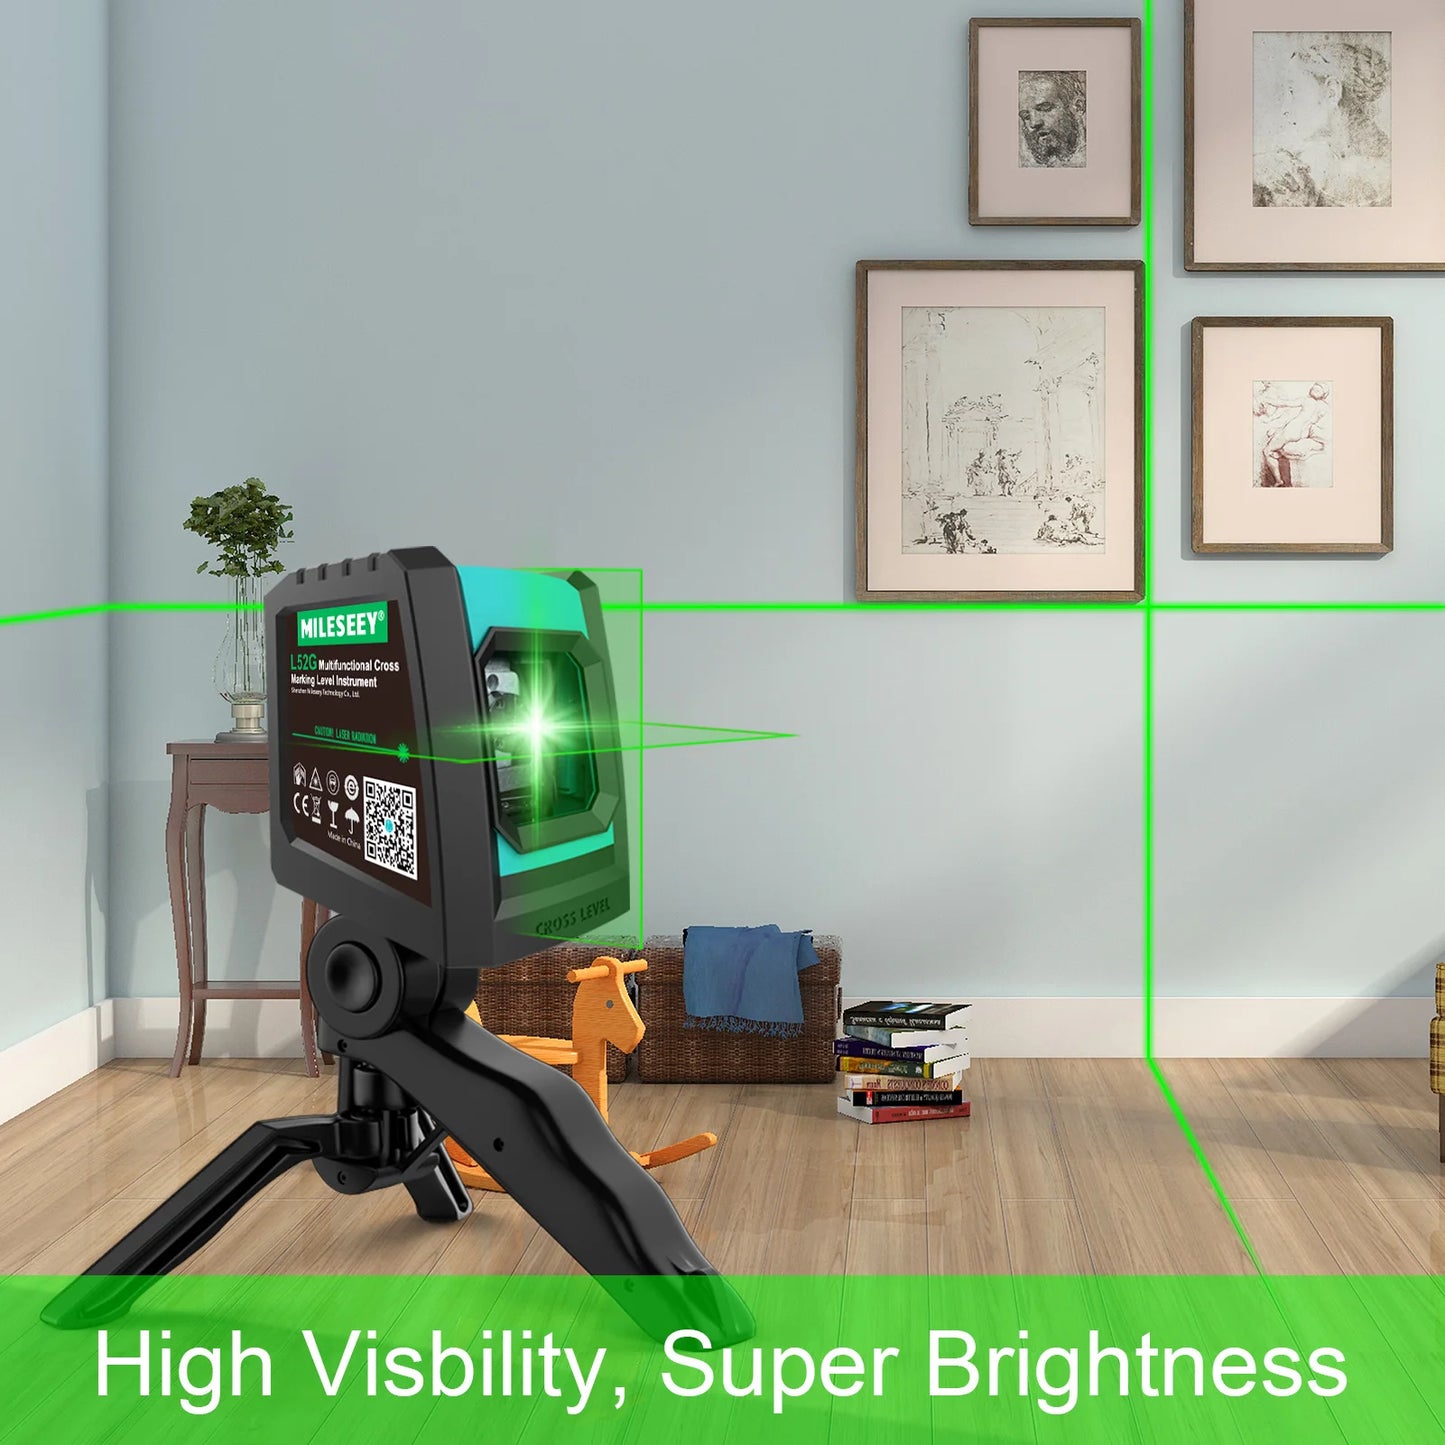 2 Lines Laser Level with Battery and Tripod